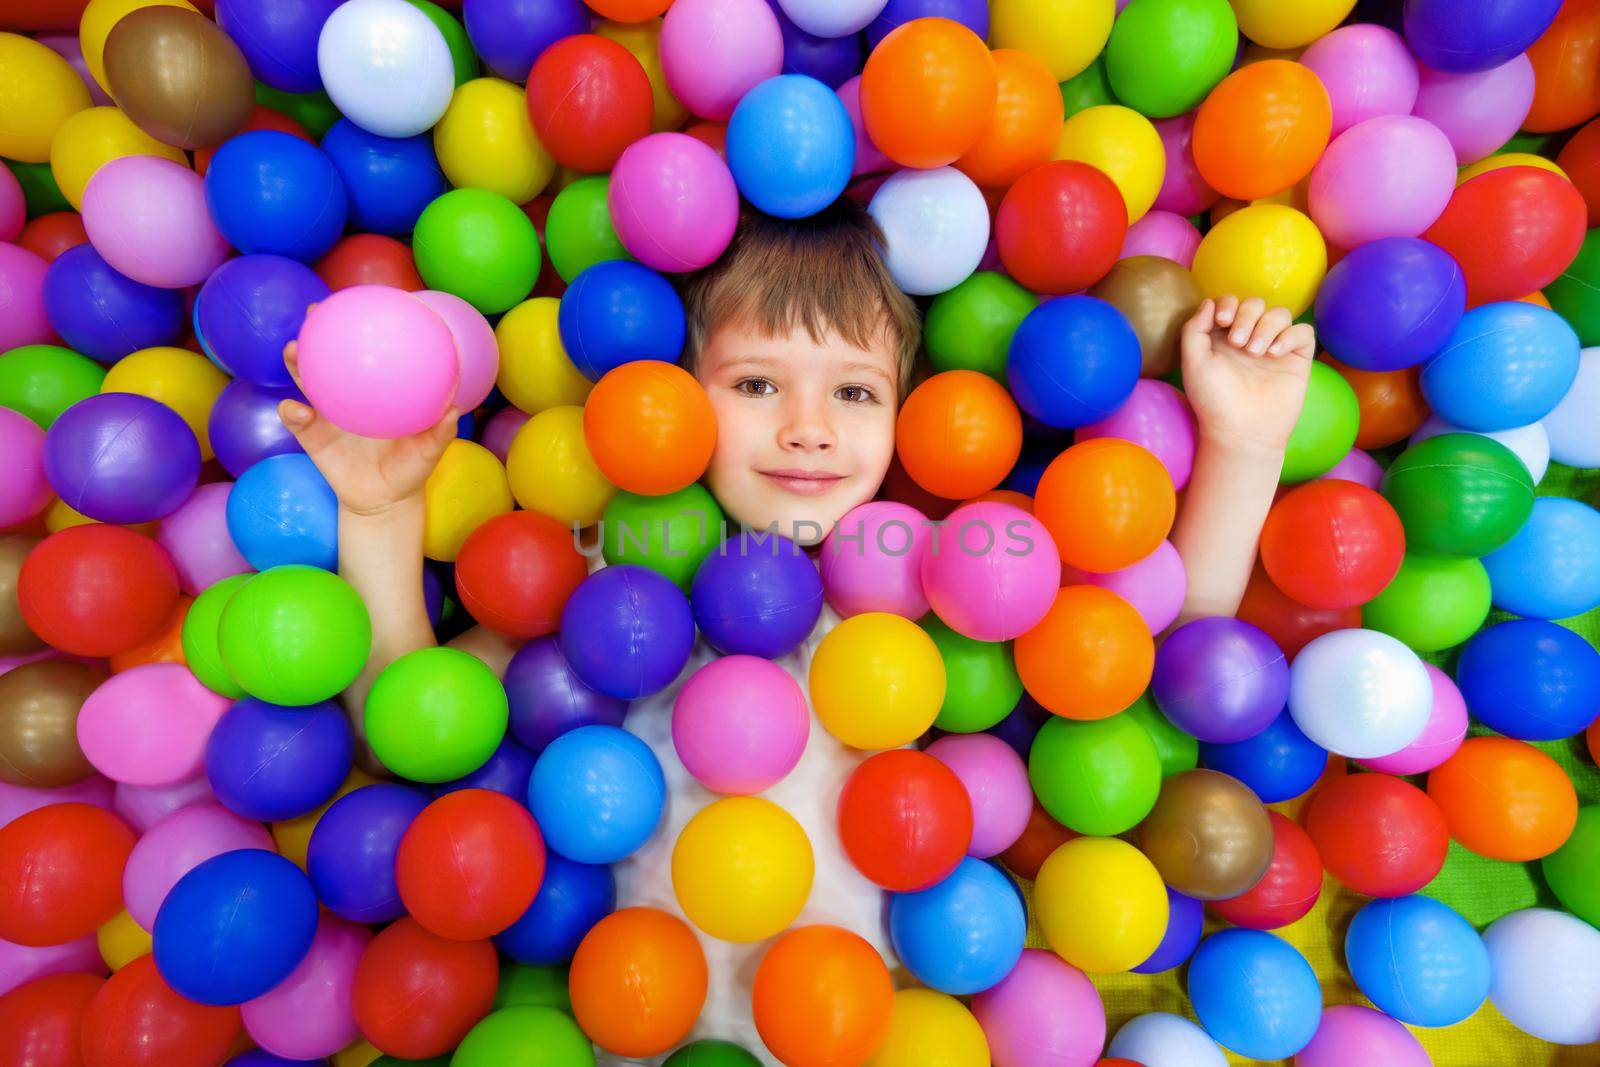 Smile kid lying colorful plastic balls pool. Playroom kids ball pit. Colorful balls dry pool kindergarten playground child indoor play area. Caucasian boy indoor playground kids play zone or kids zone by synel